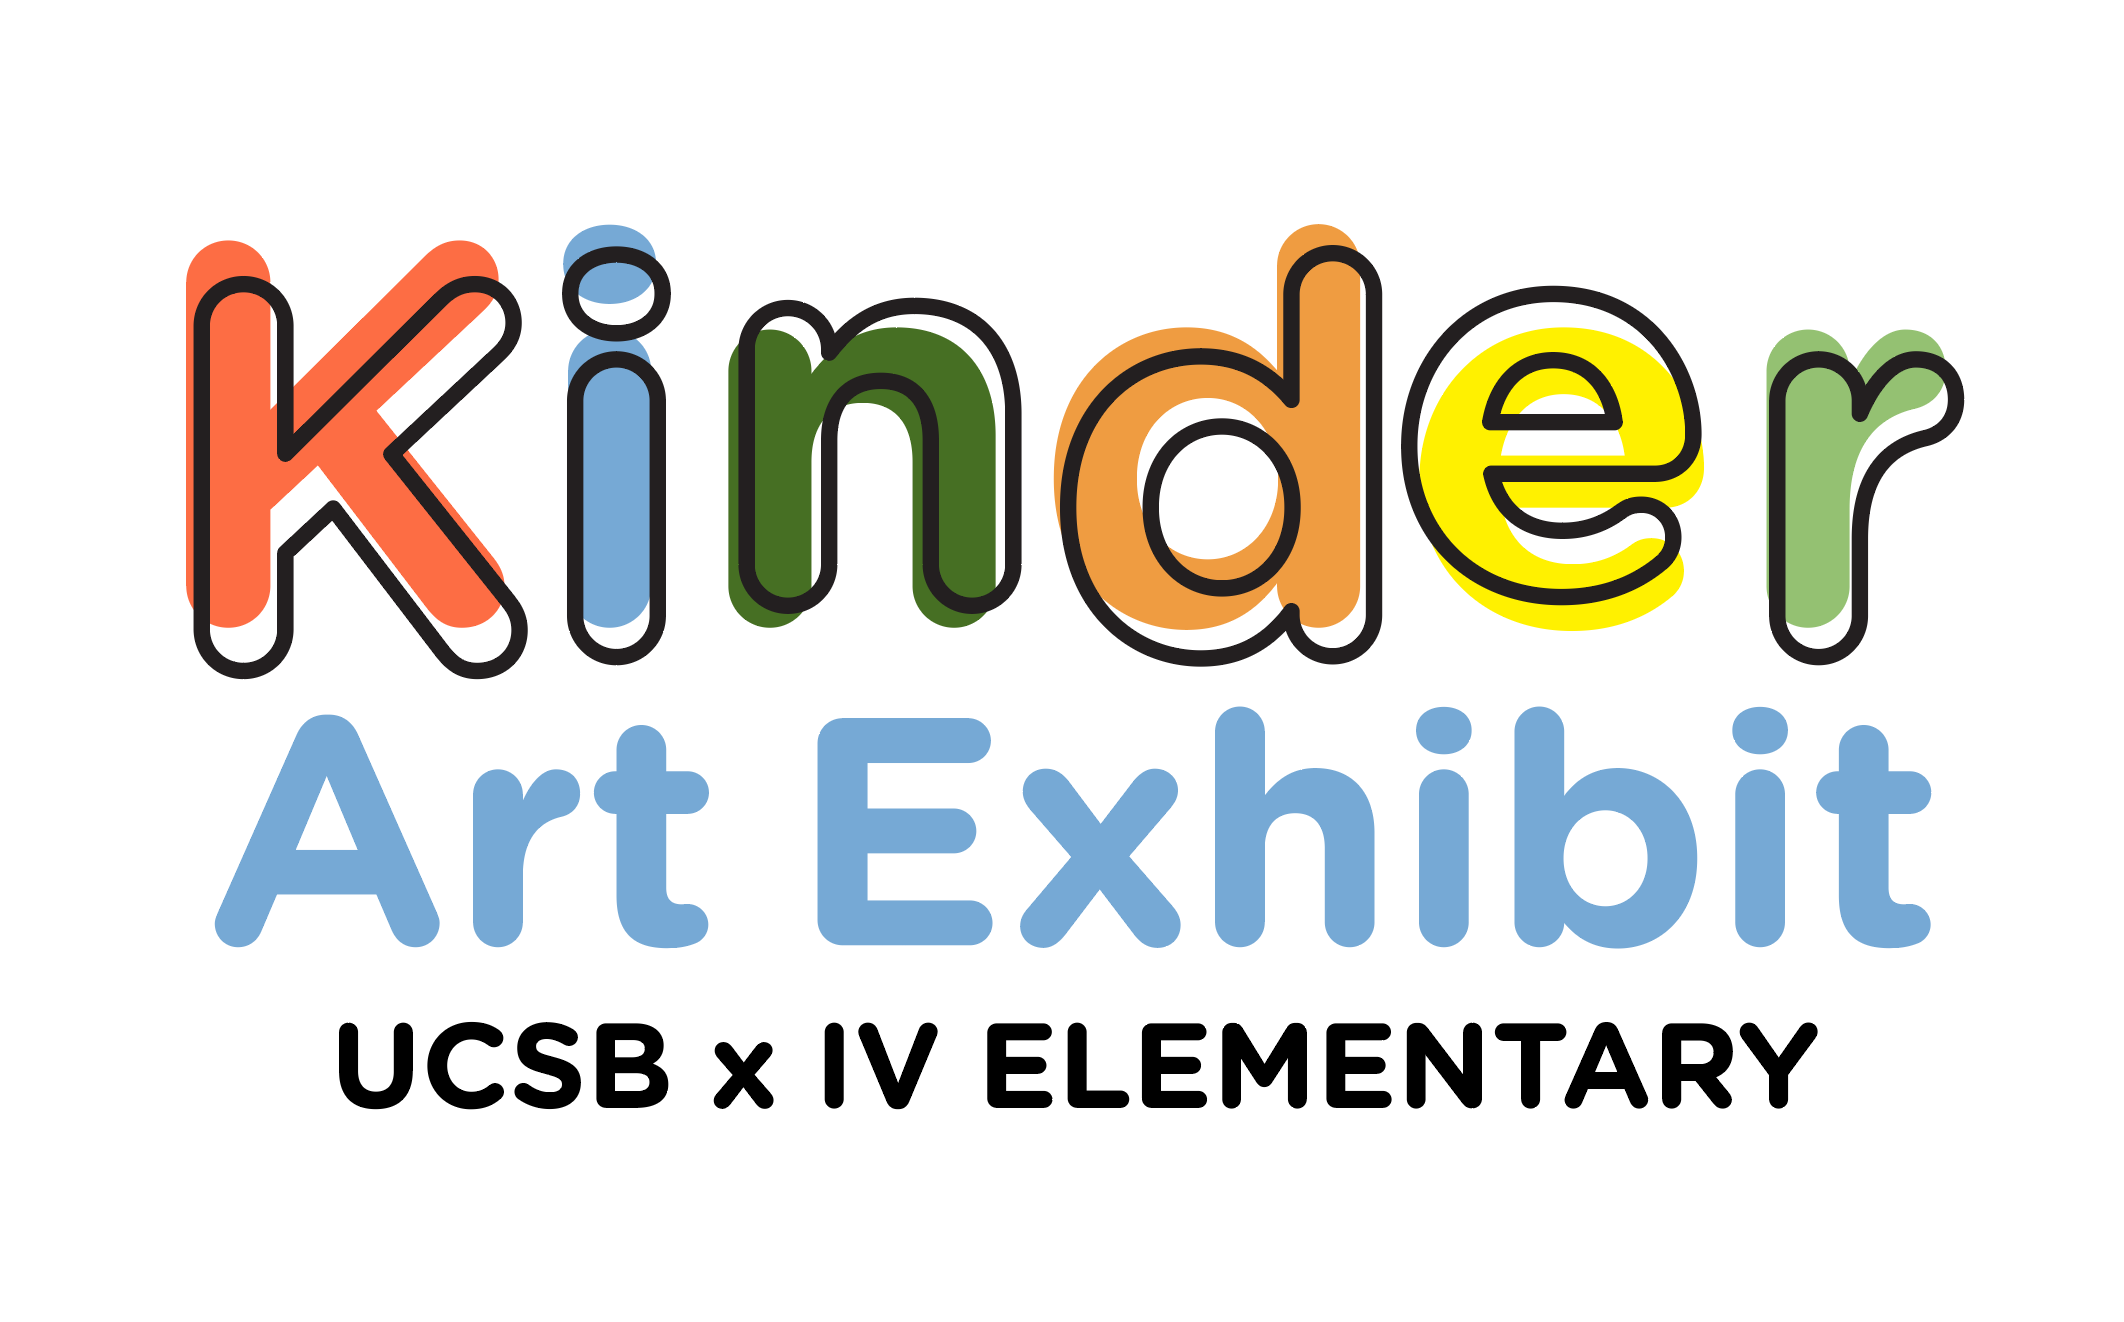 Colorful text "Kinder Art Exhibit" and black text "UCSB x IV Elementary" on white background